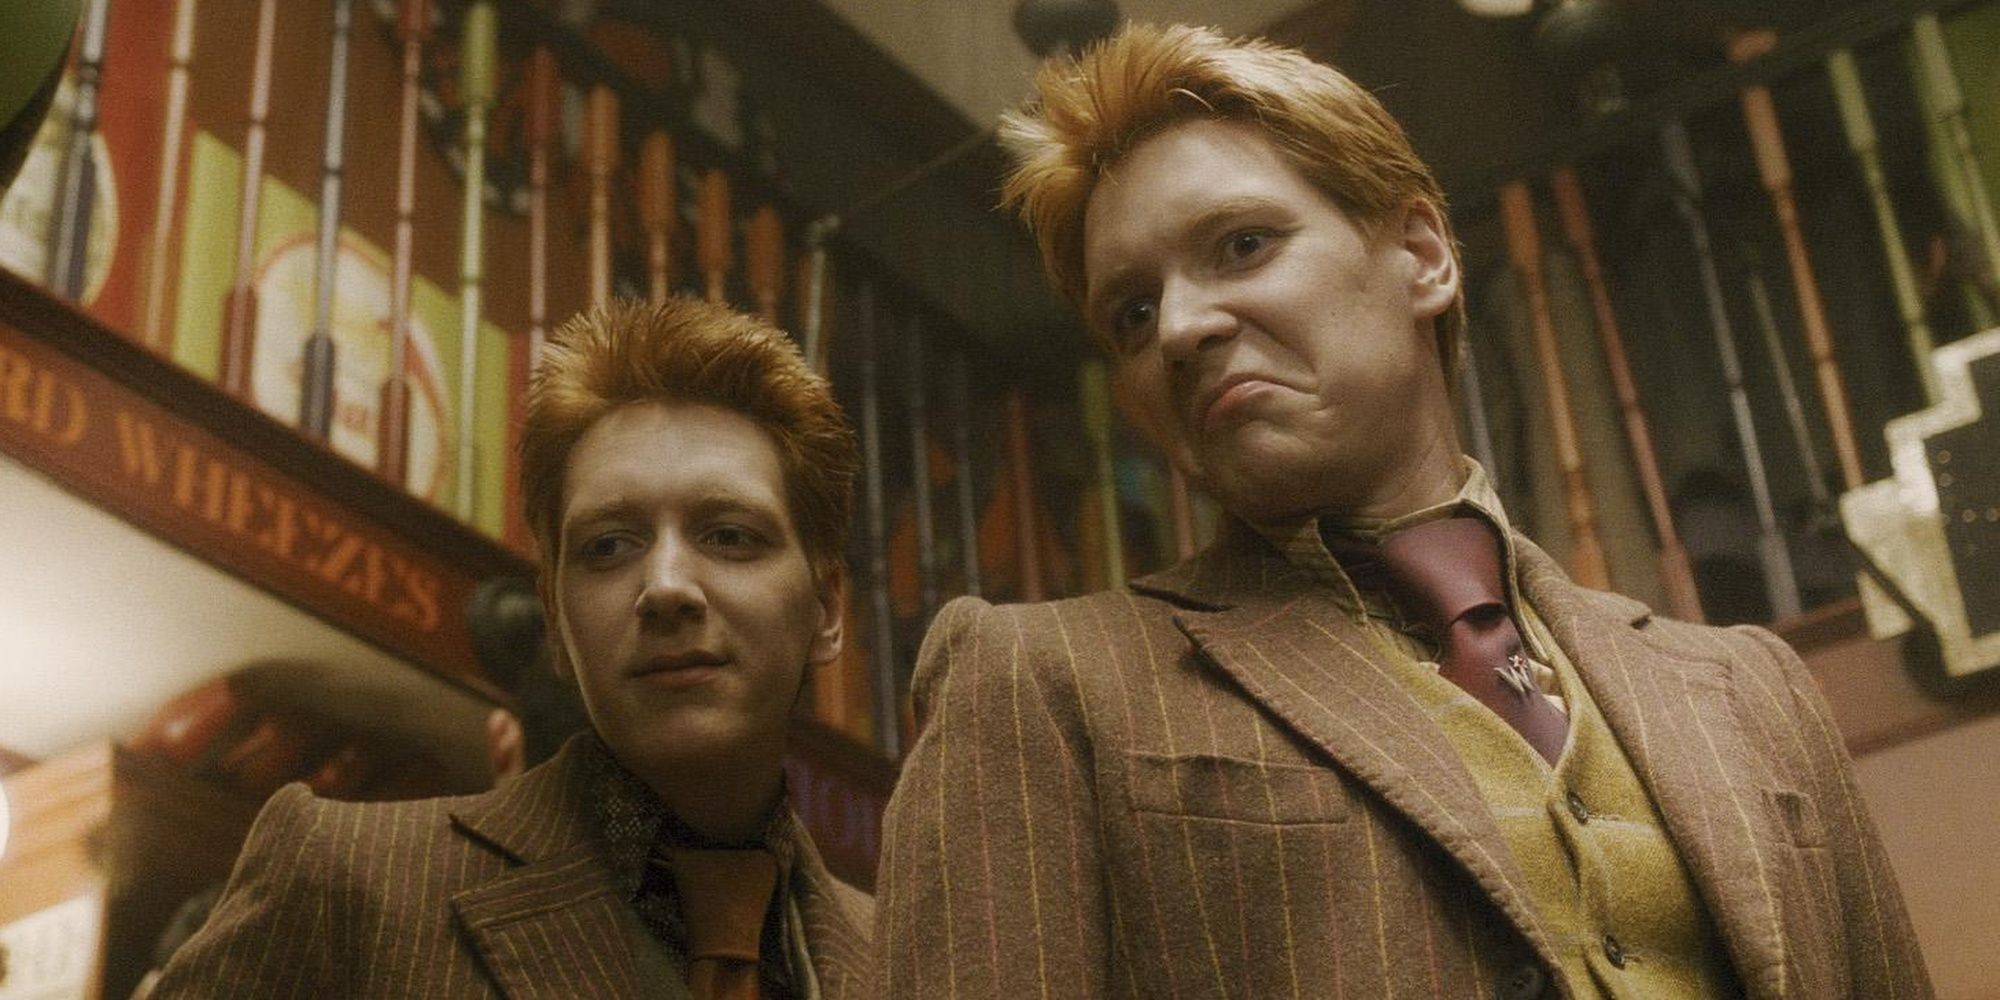 fred and george weasley stood on the steps in their joke shop